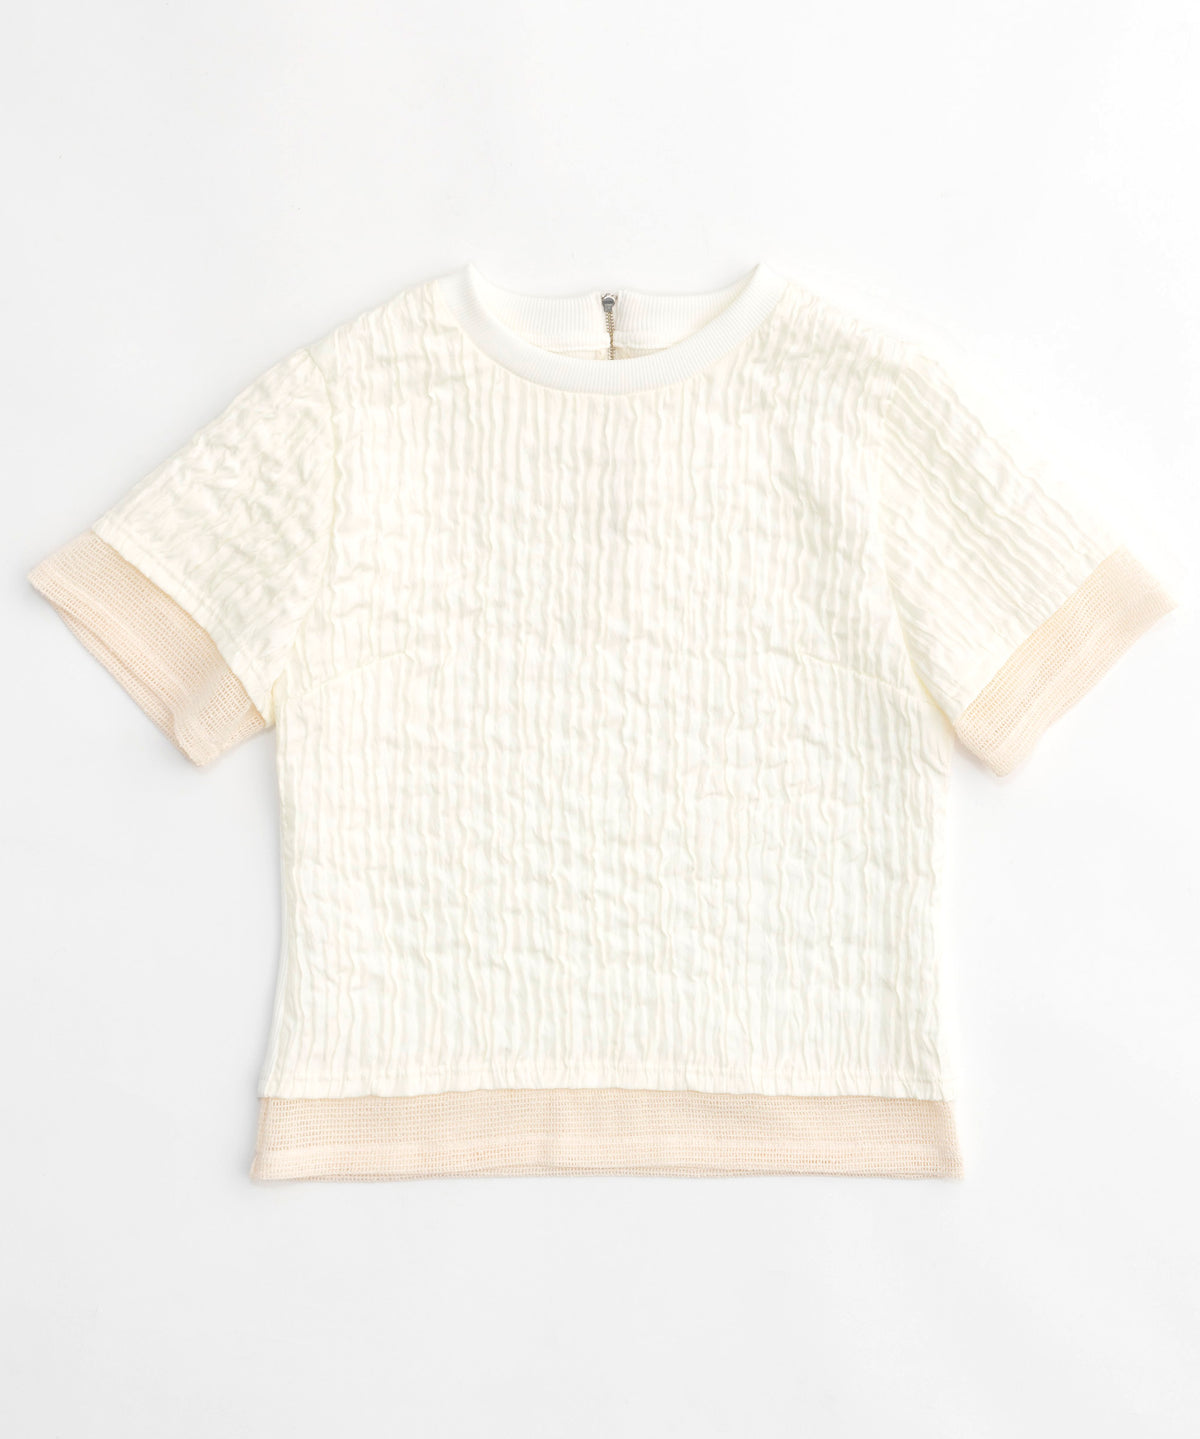 【24SUMMER PRE-ORDER】Floating Jacquard Compact Tops